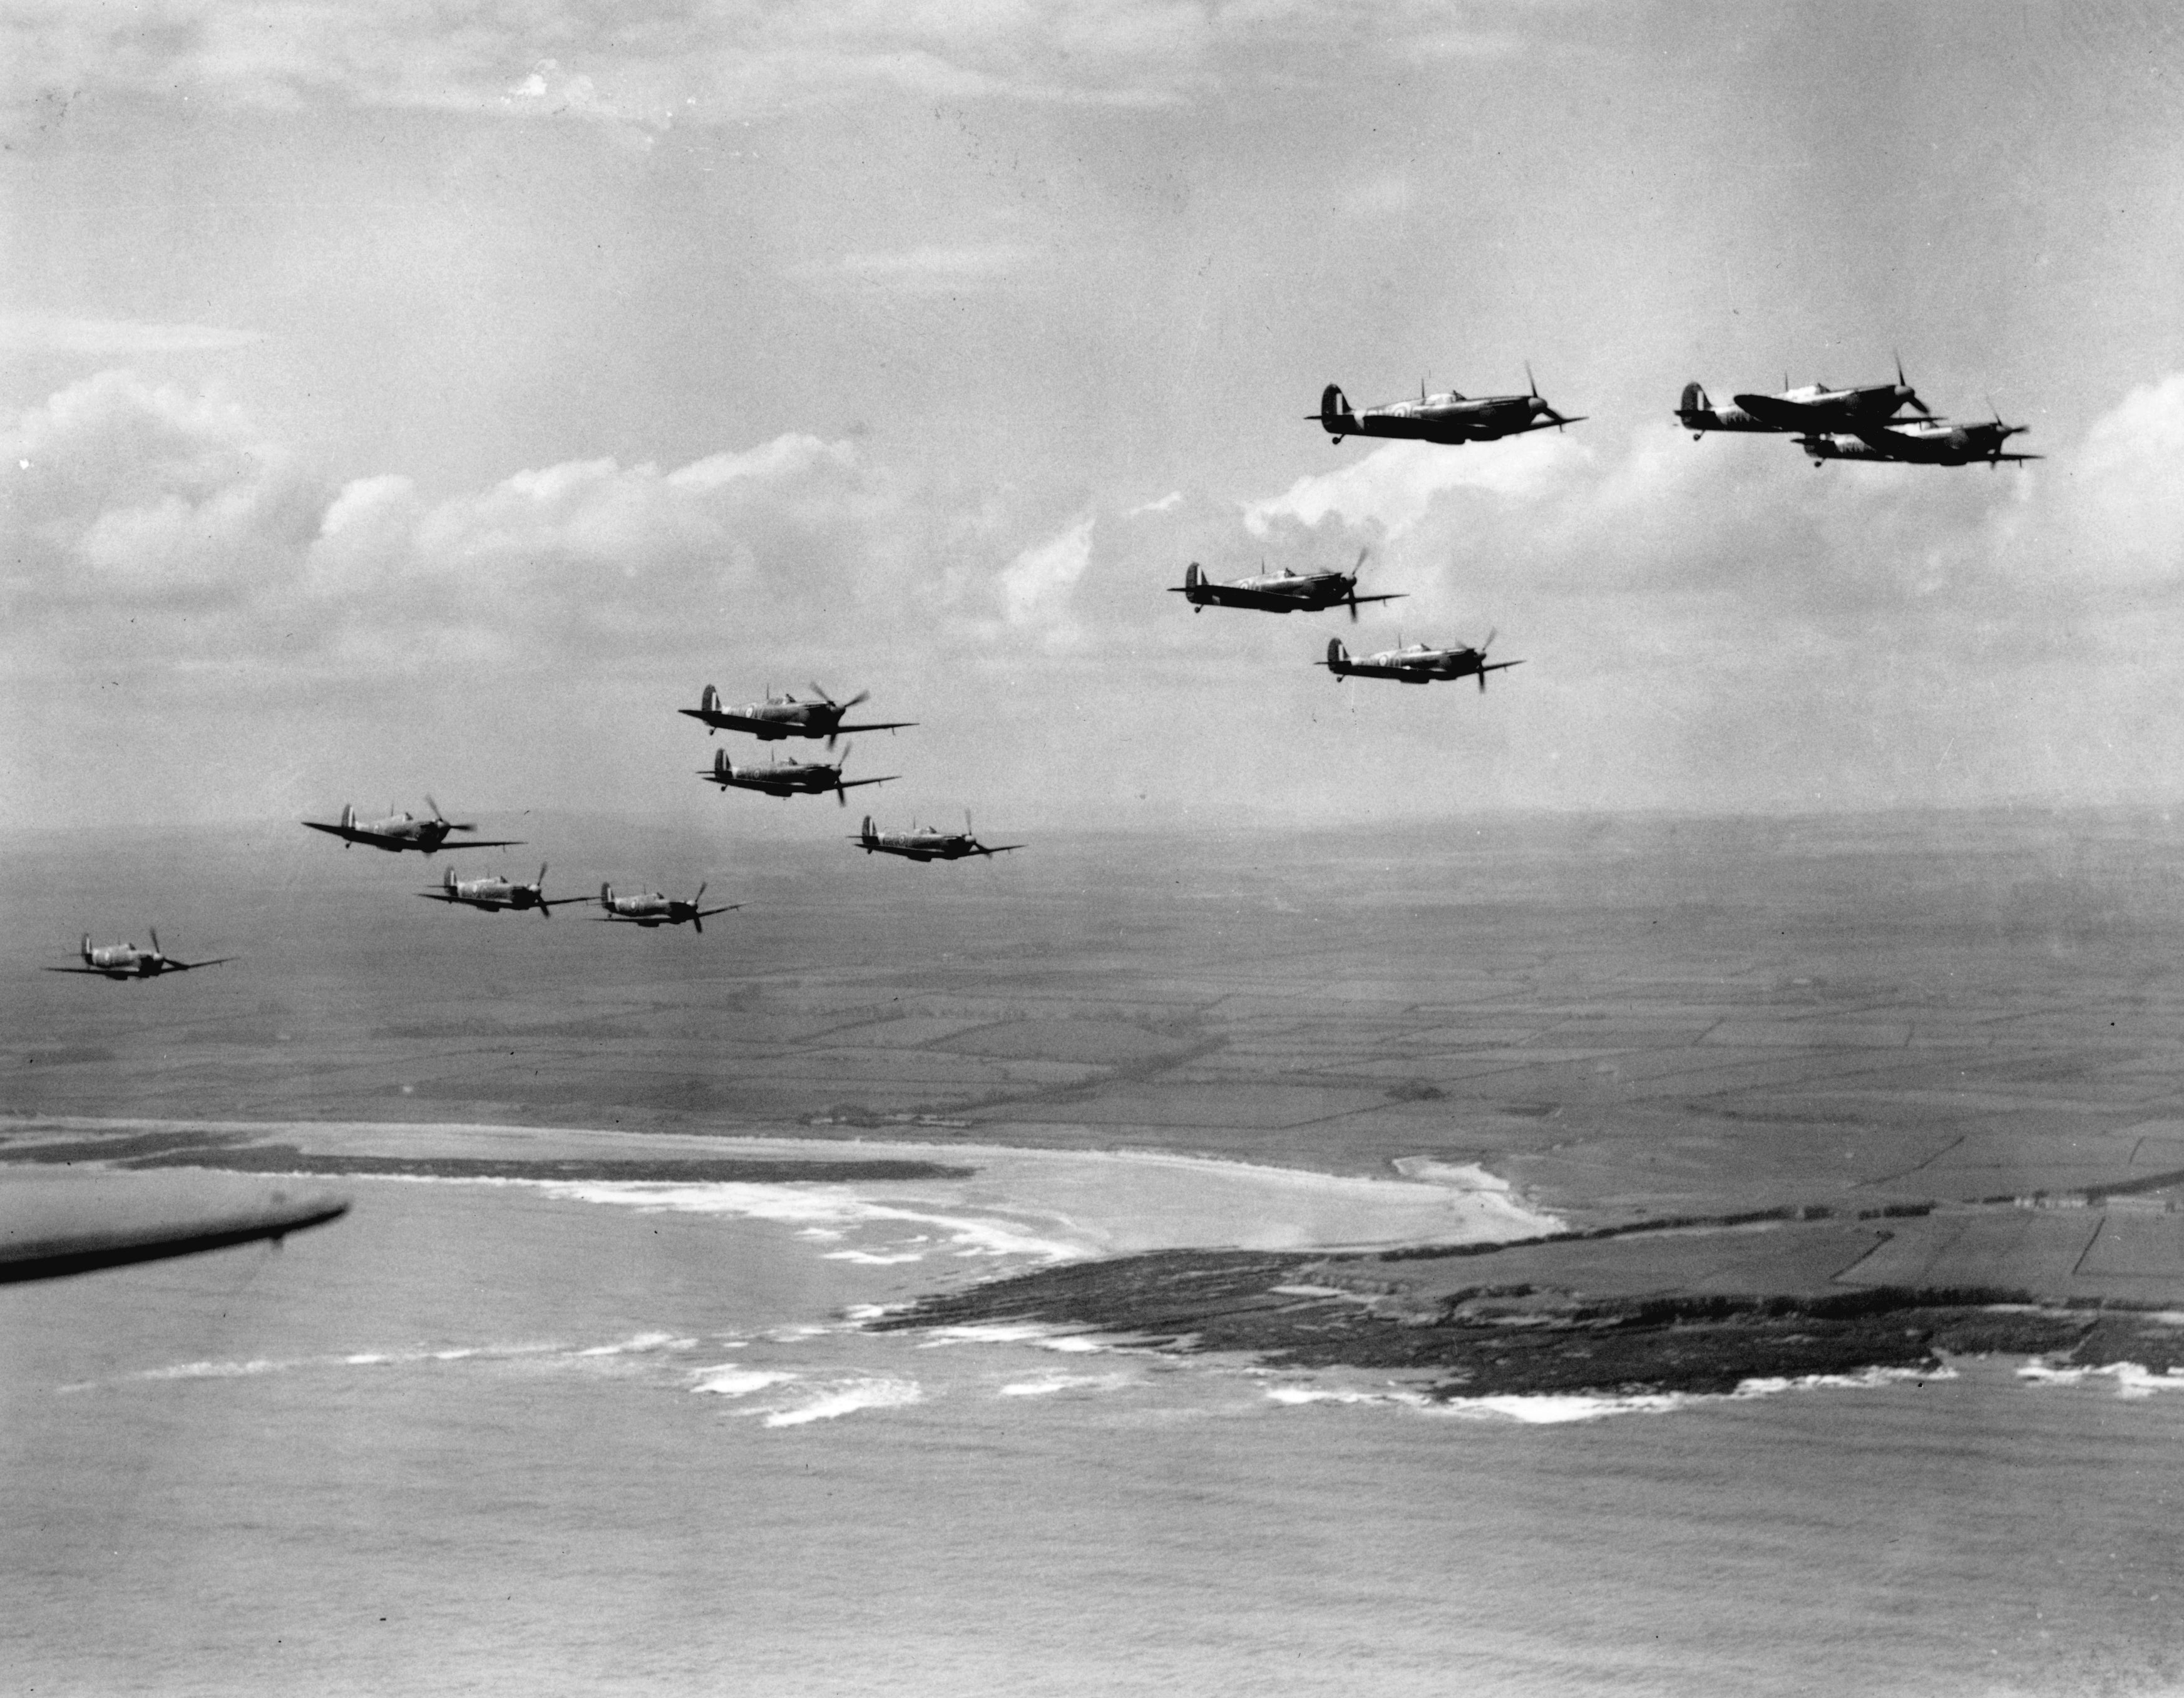 Spitfires on patrol over the coast during the Battle of Britain